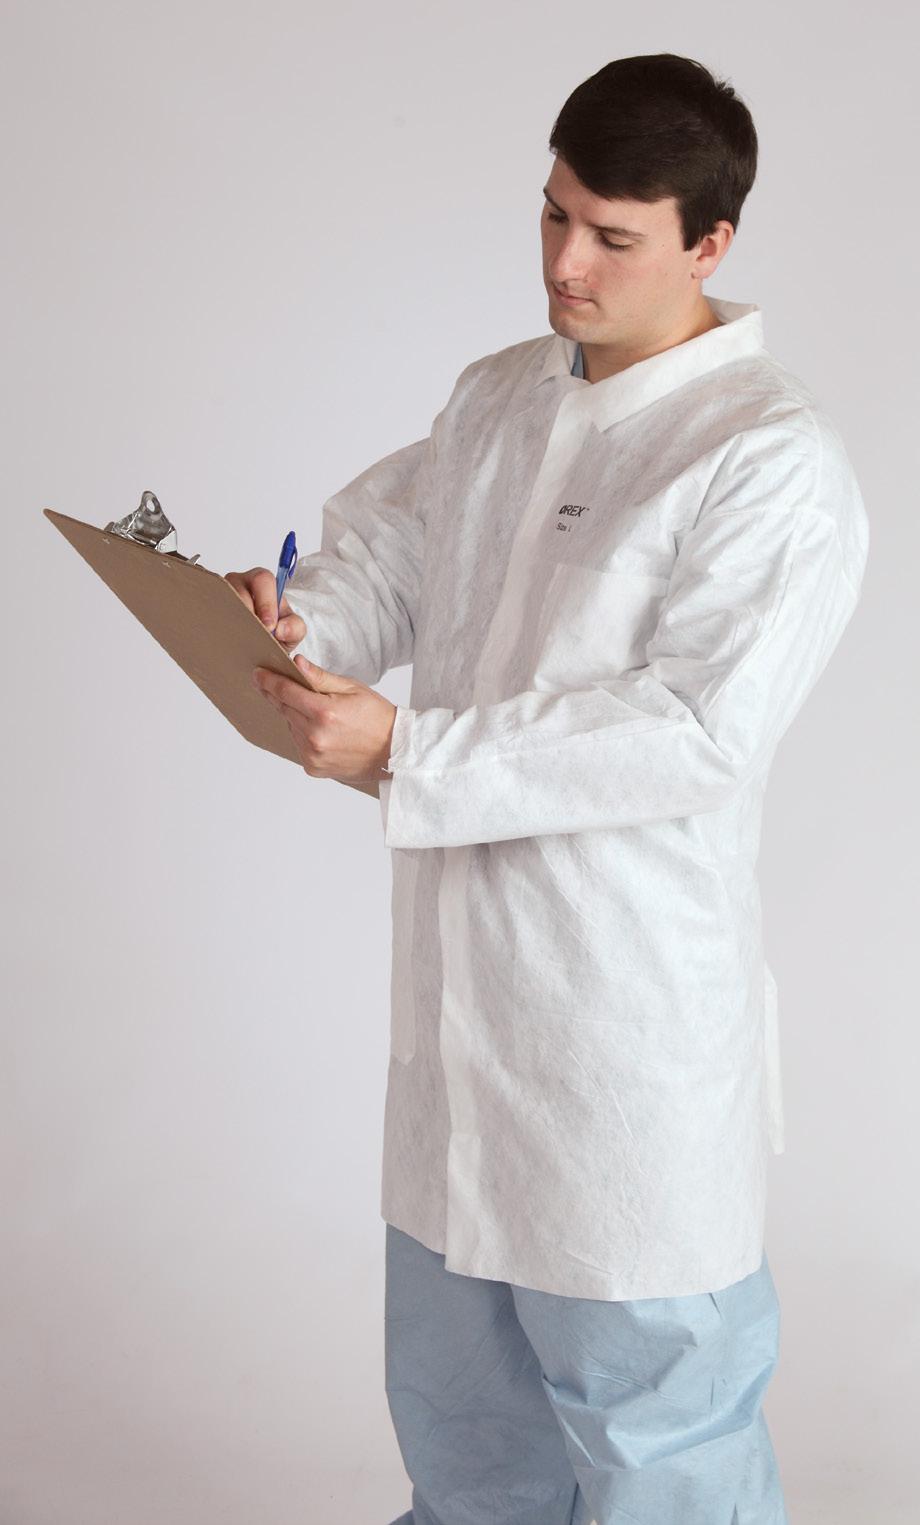 Lab coats & scrubs OREX Lab Coats Made from OREX fabric. Chest pocket and one waist pocket. Hook and loop closures.